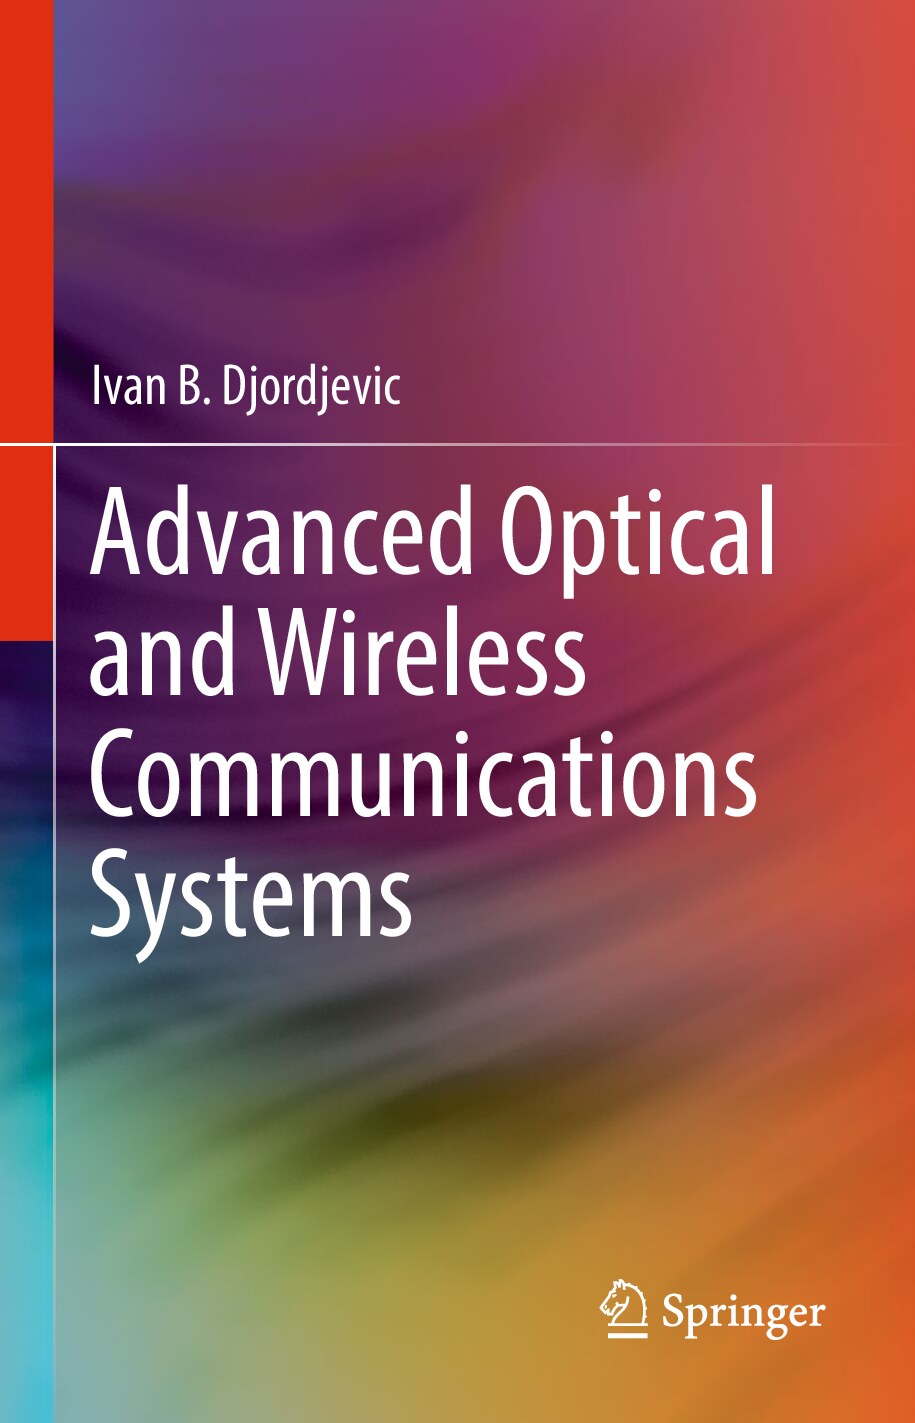 Advanced Optical and Wireless Communications Systems, 2018